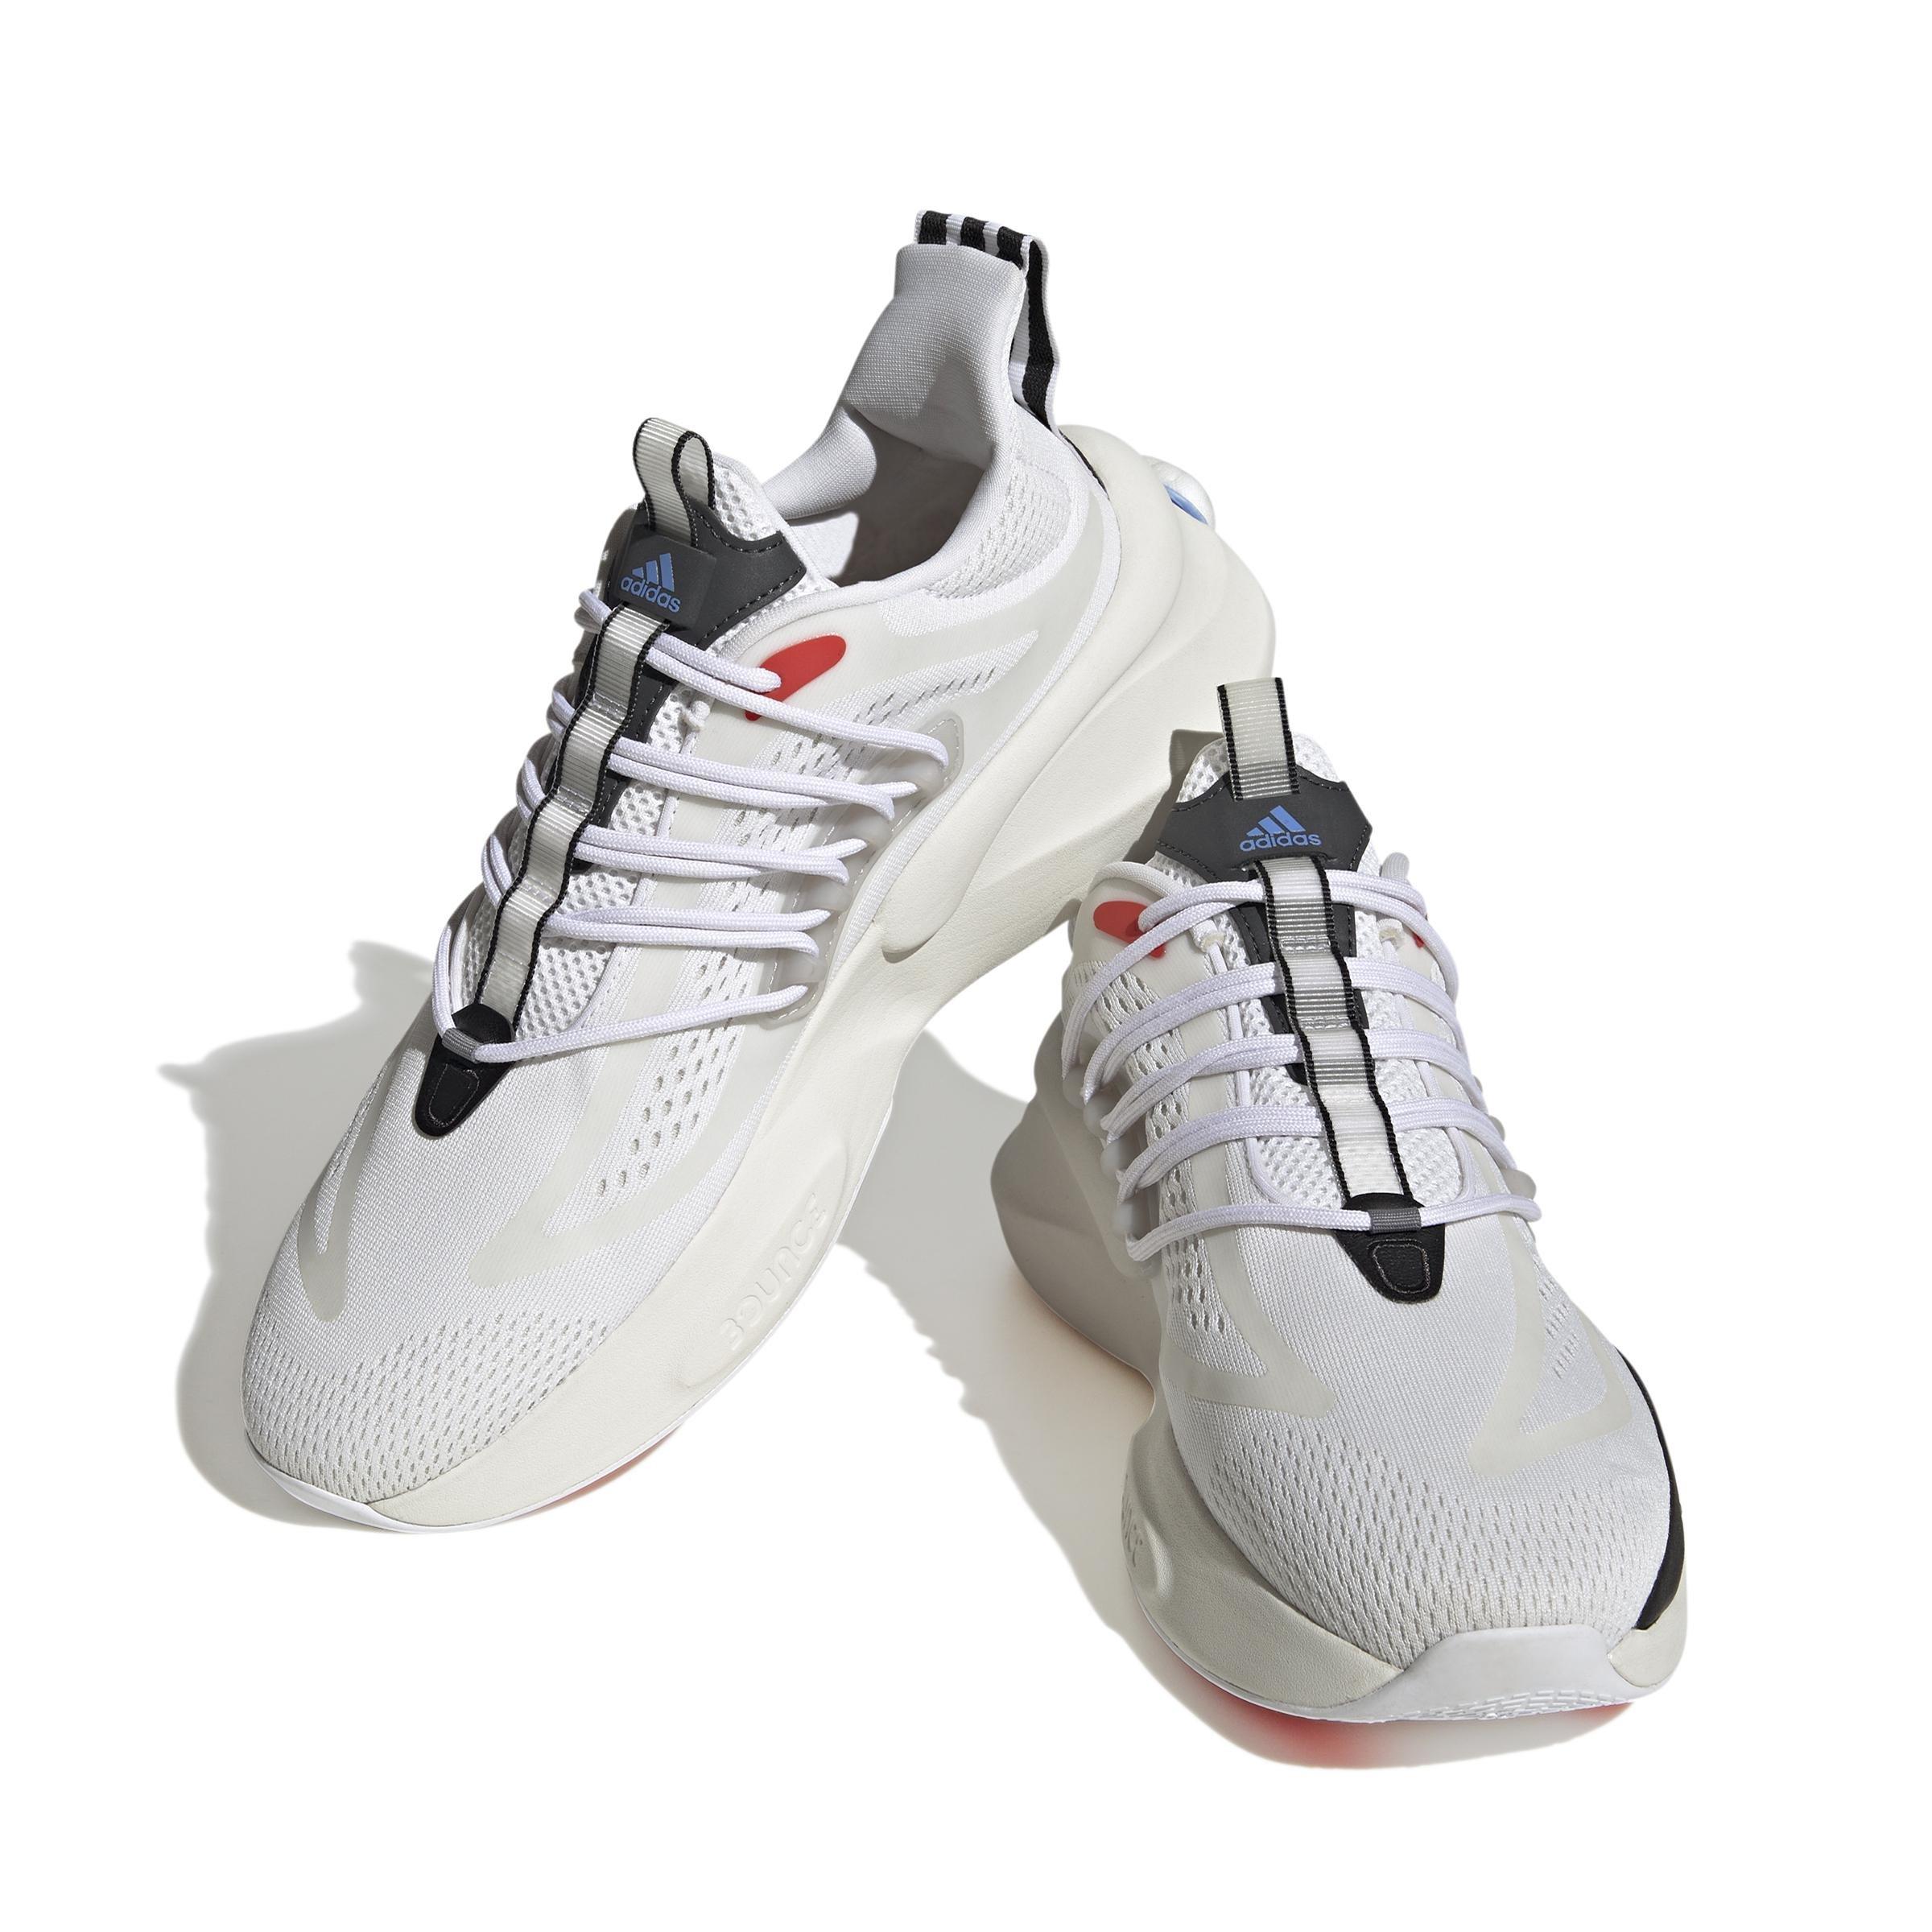 adidas - Men Alphaboost V1 Sustainable Boost Shoes Ftwr, White